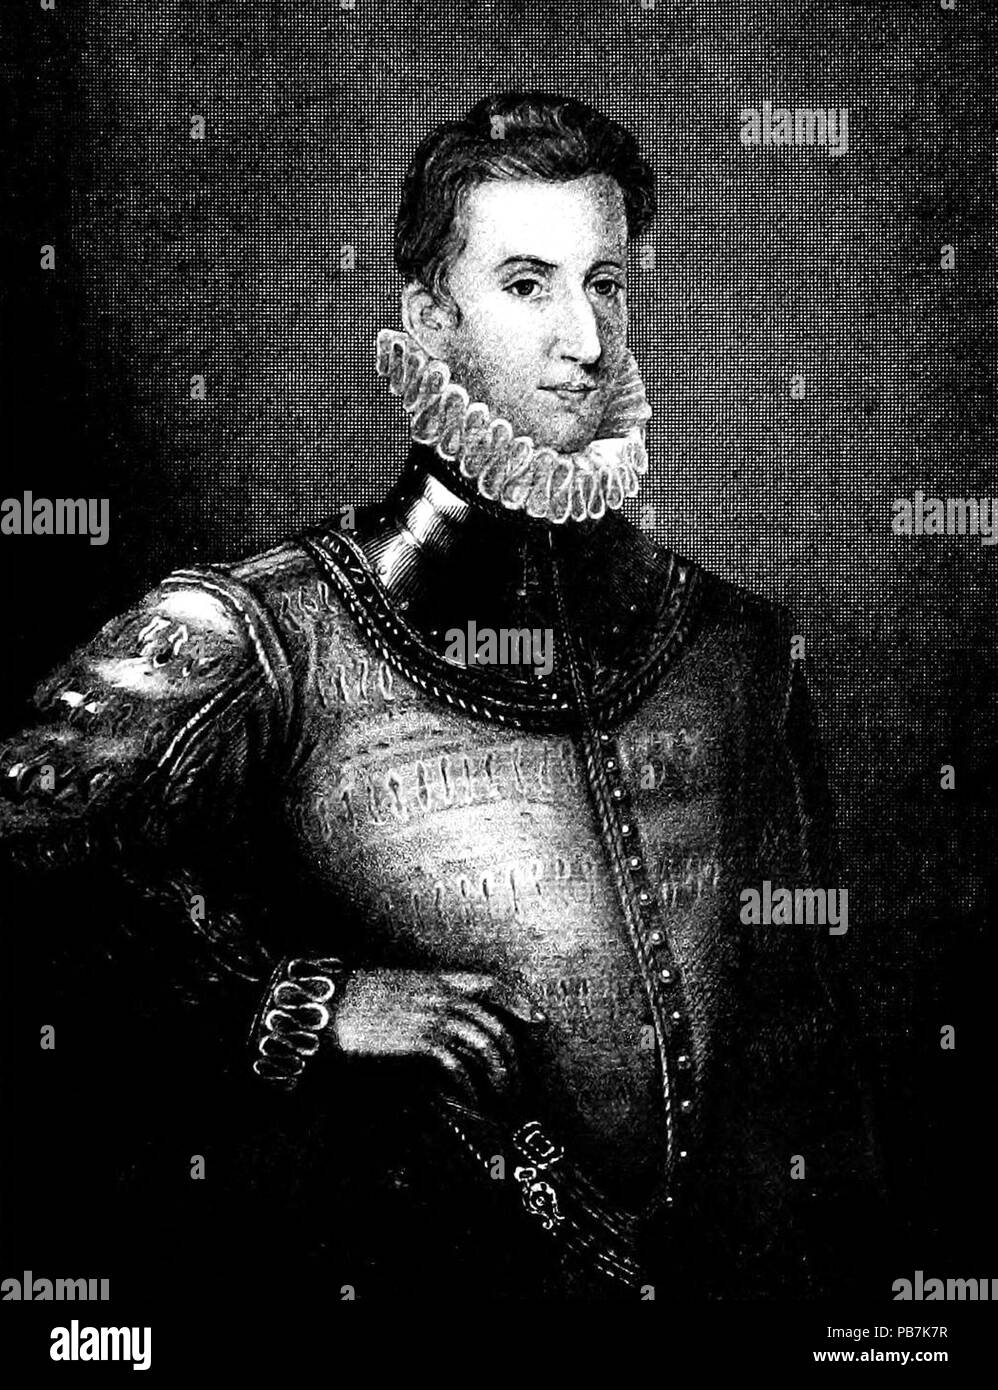 1218 Portrait of Sir Philip Sidney, illusthatixg the ruff worn with armour- Elizabethan People (book) Stock Photo